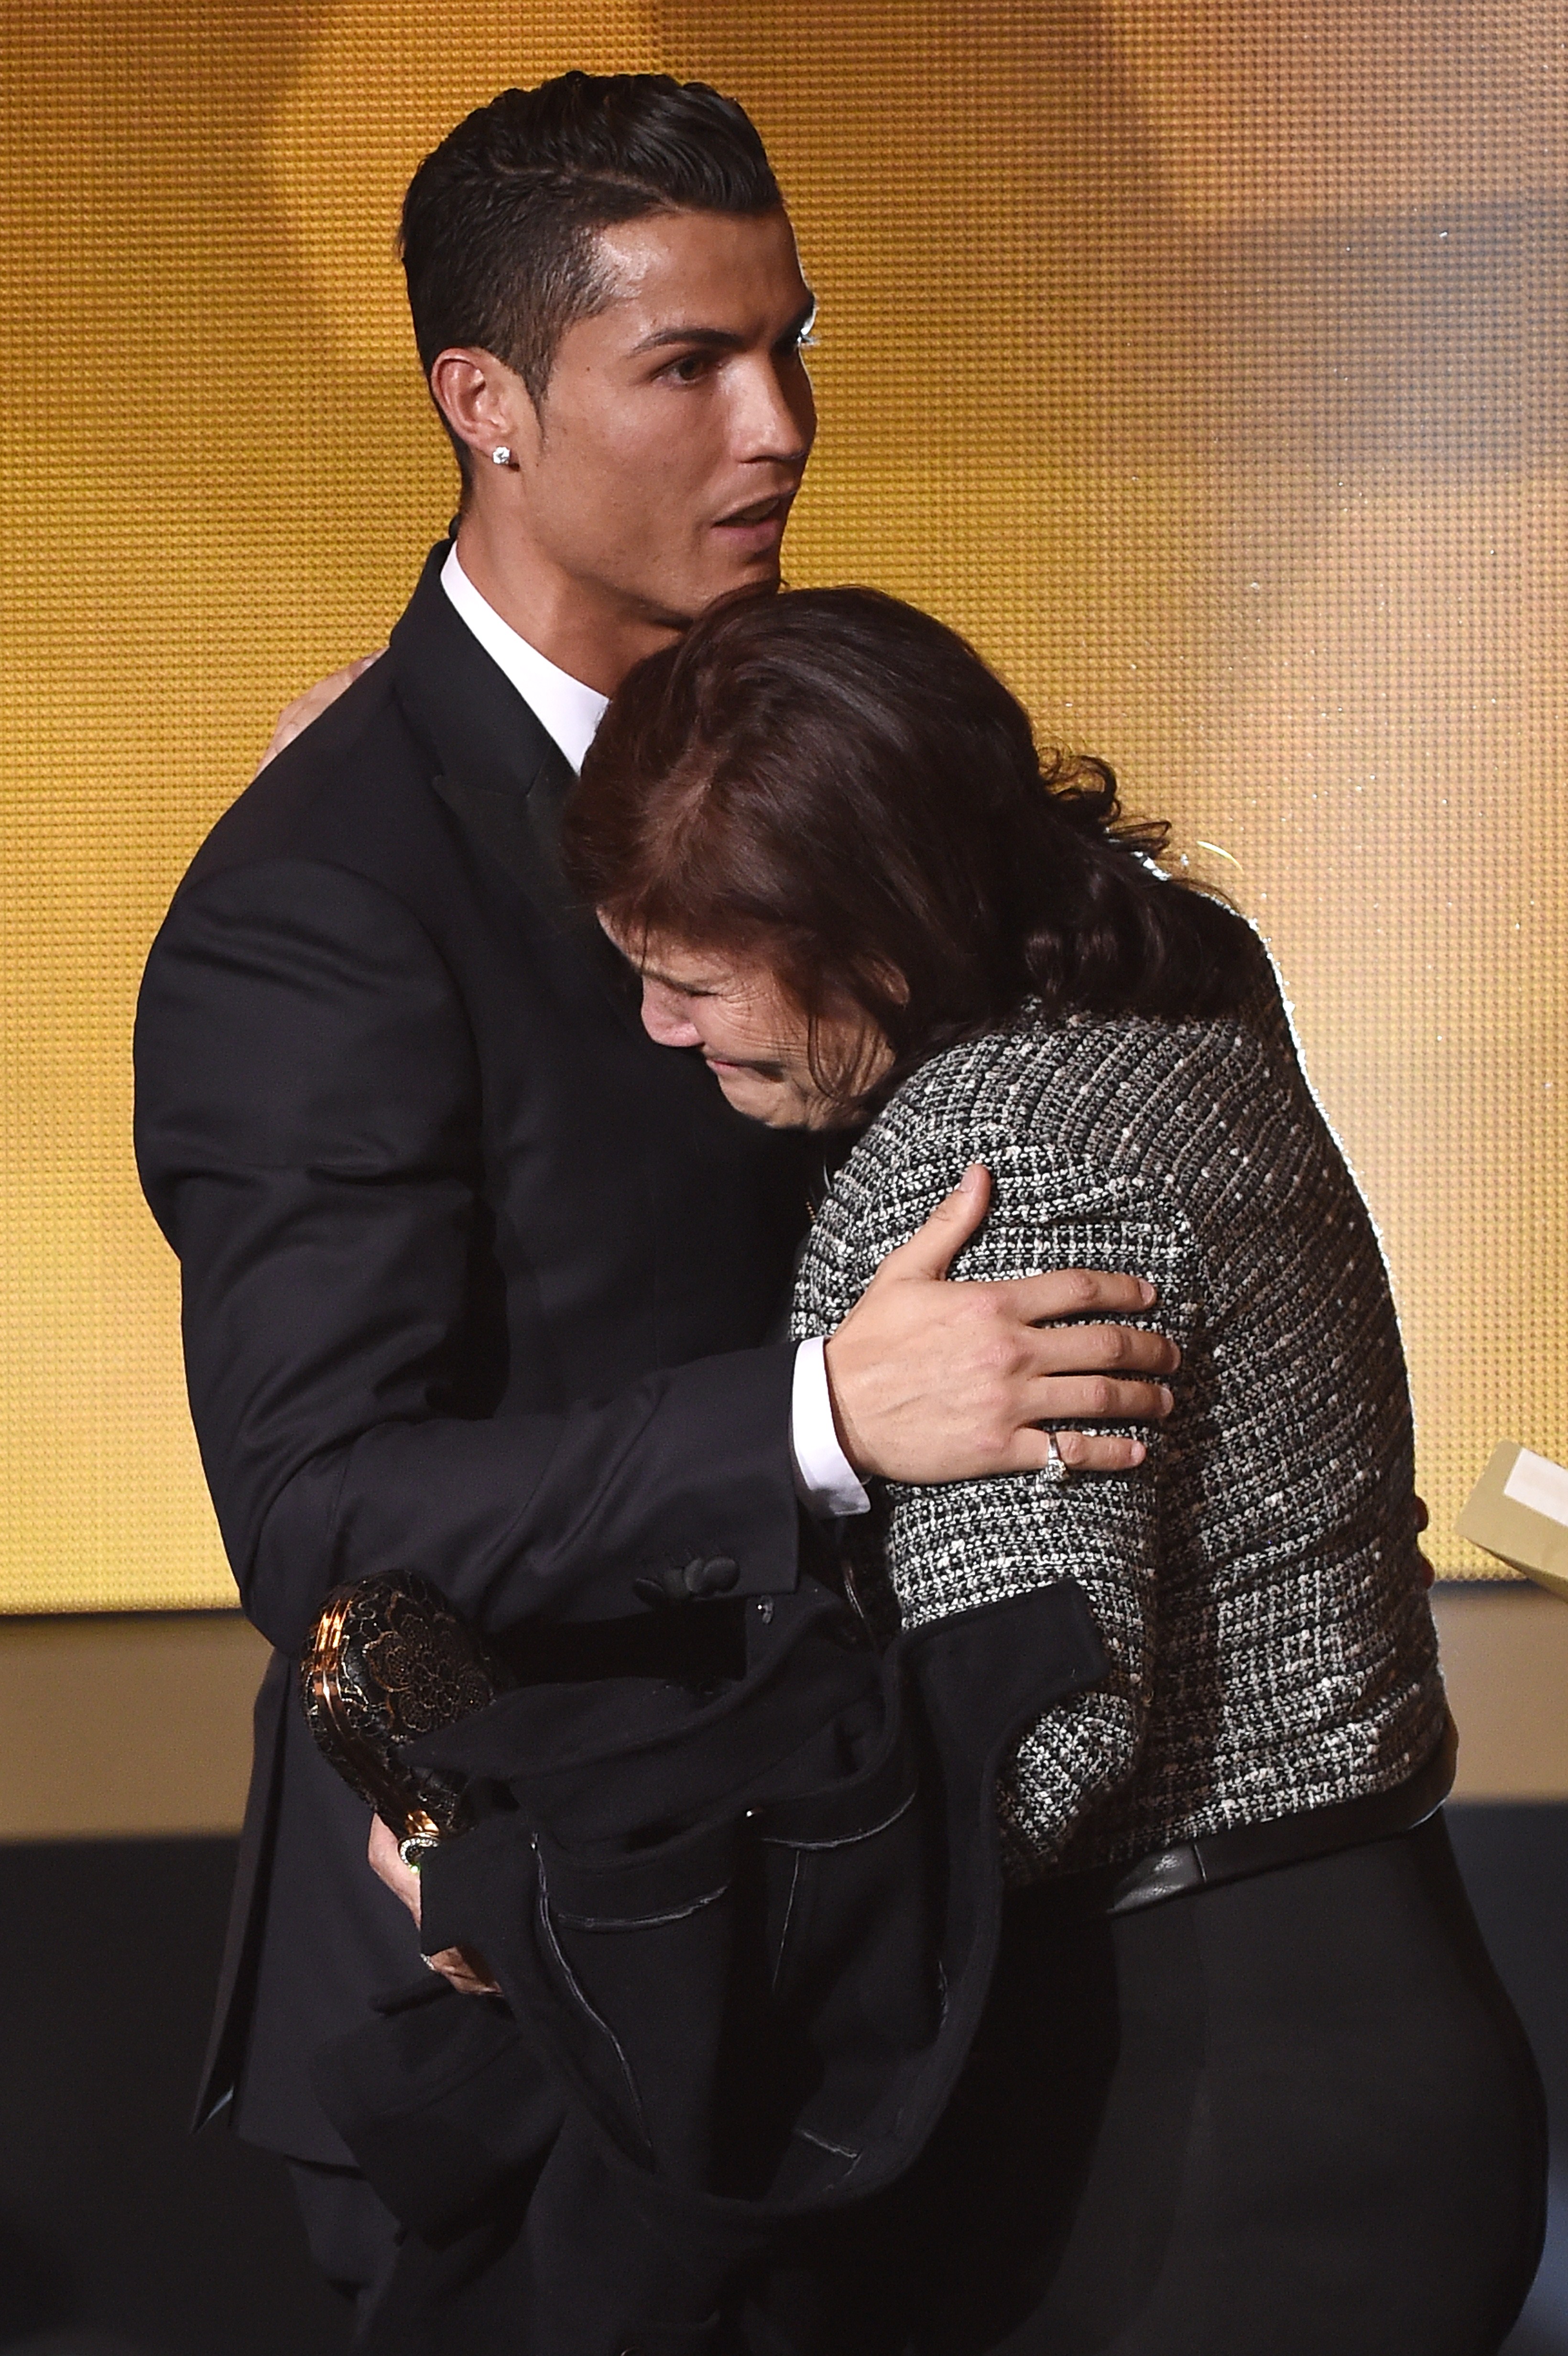 Cristiano Ronaldo and Dolores Aveiro at the FIFA Ballon d'Or Award ceremony in Zürich, Switzerland on January 12, 2015 | Source: Getty Images